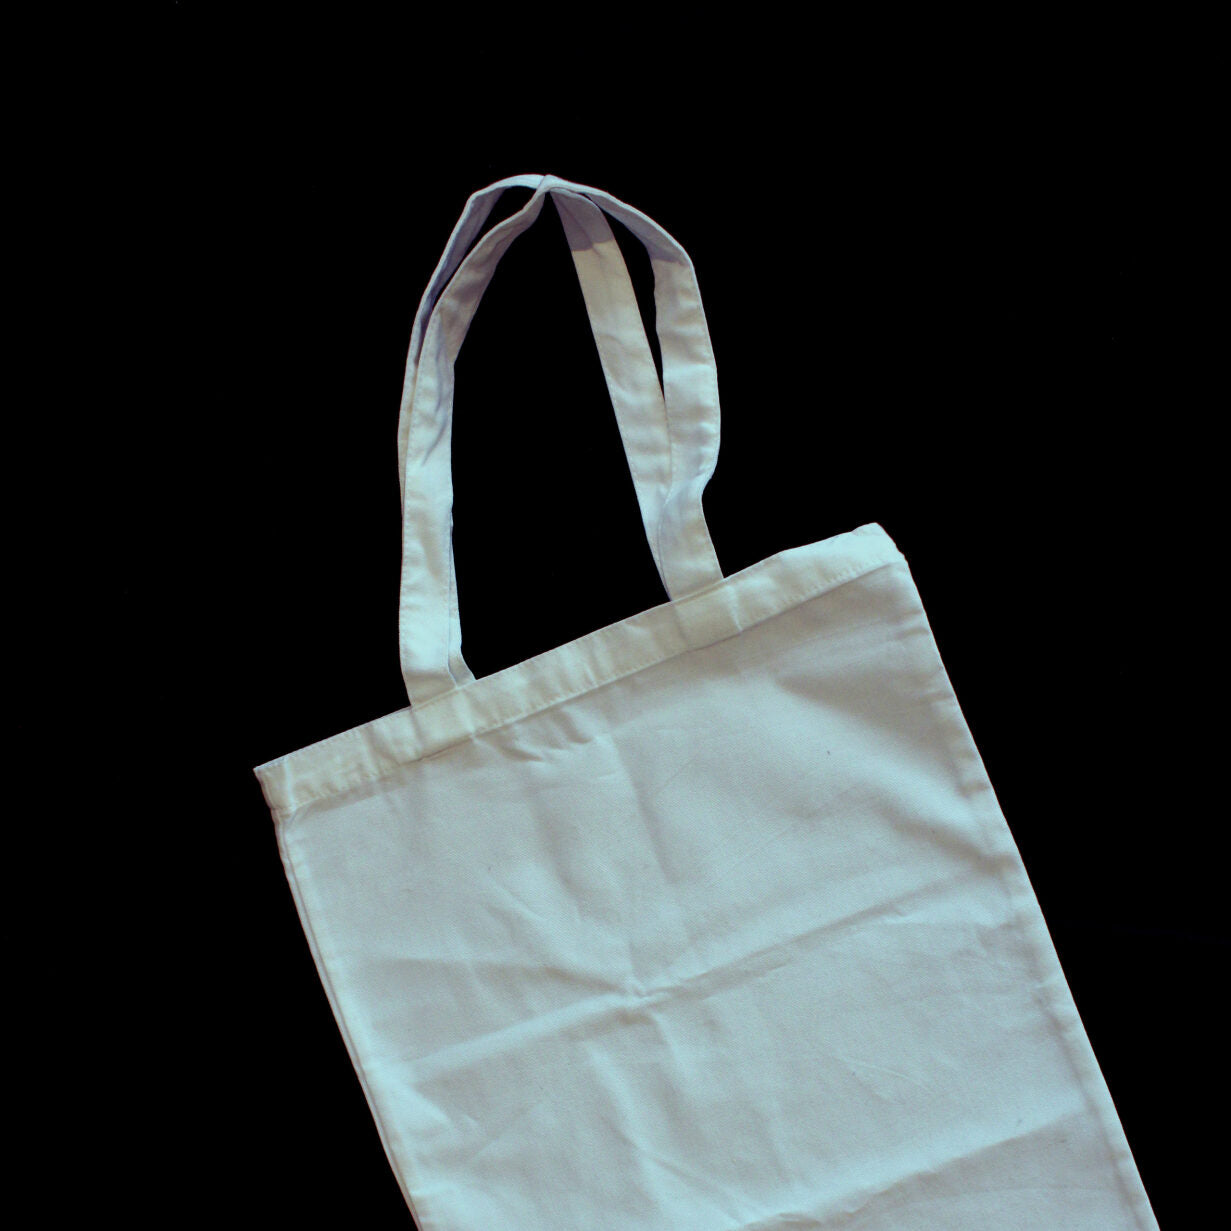 100% polyester sublimation blank tote bag Regular thickness 14x12